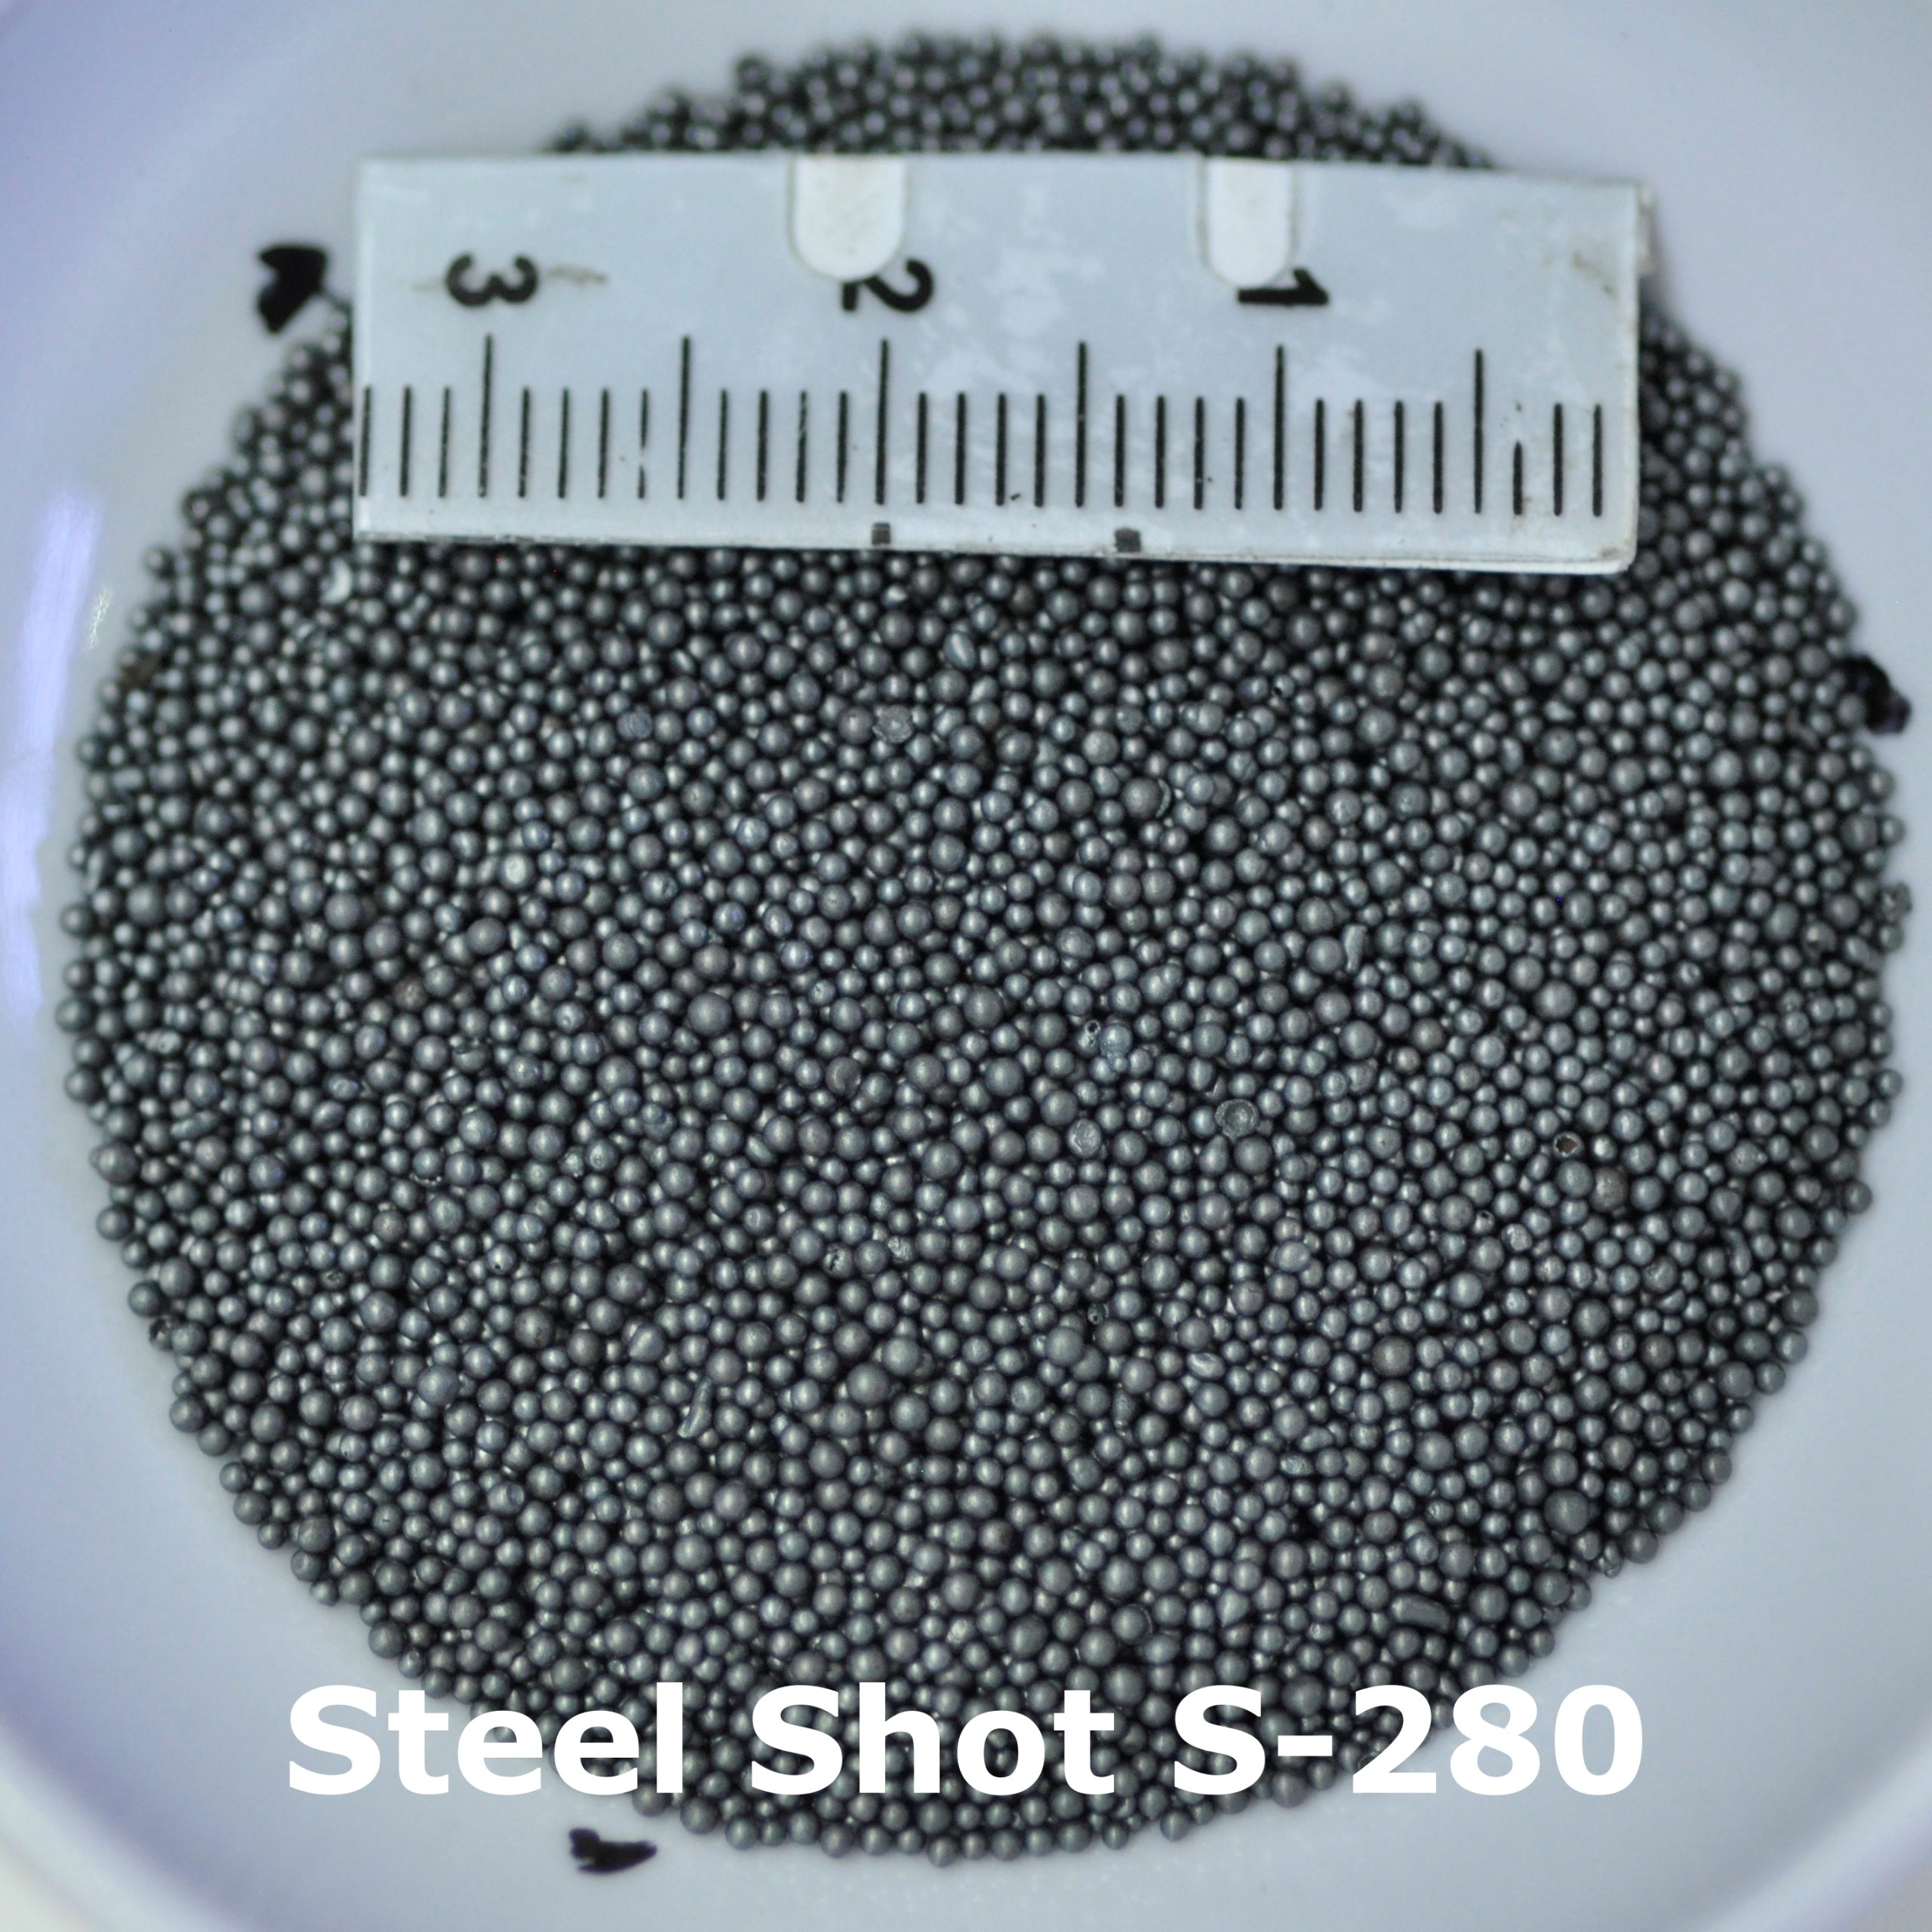 S-280/SH-80
Size 0.80mm